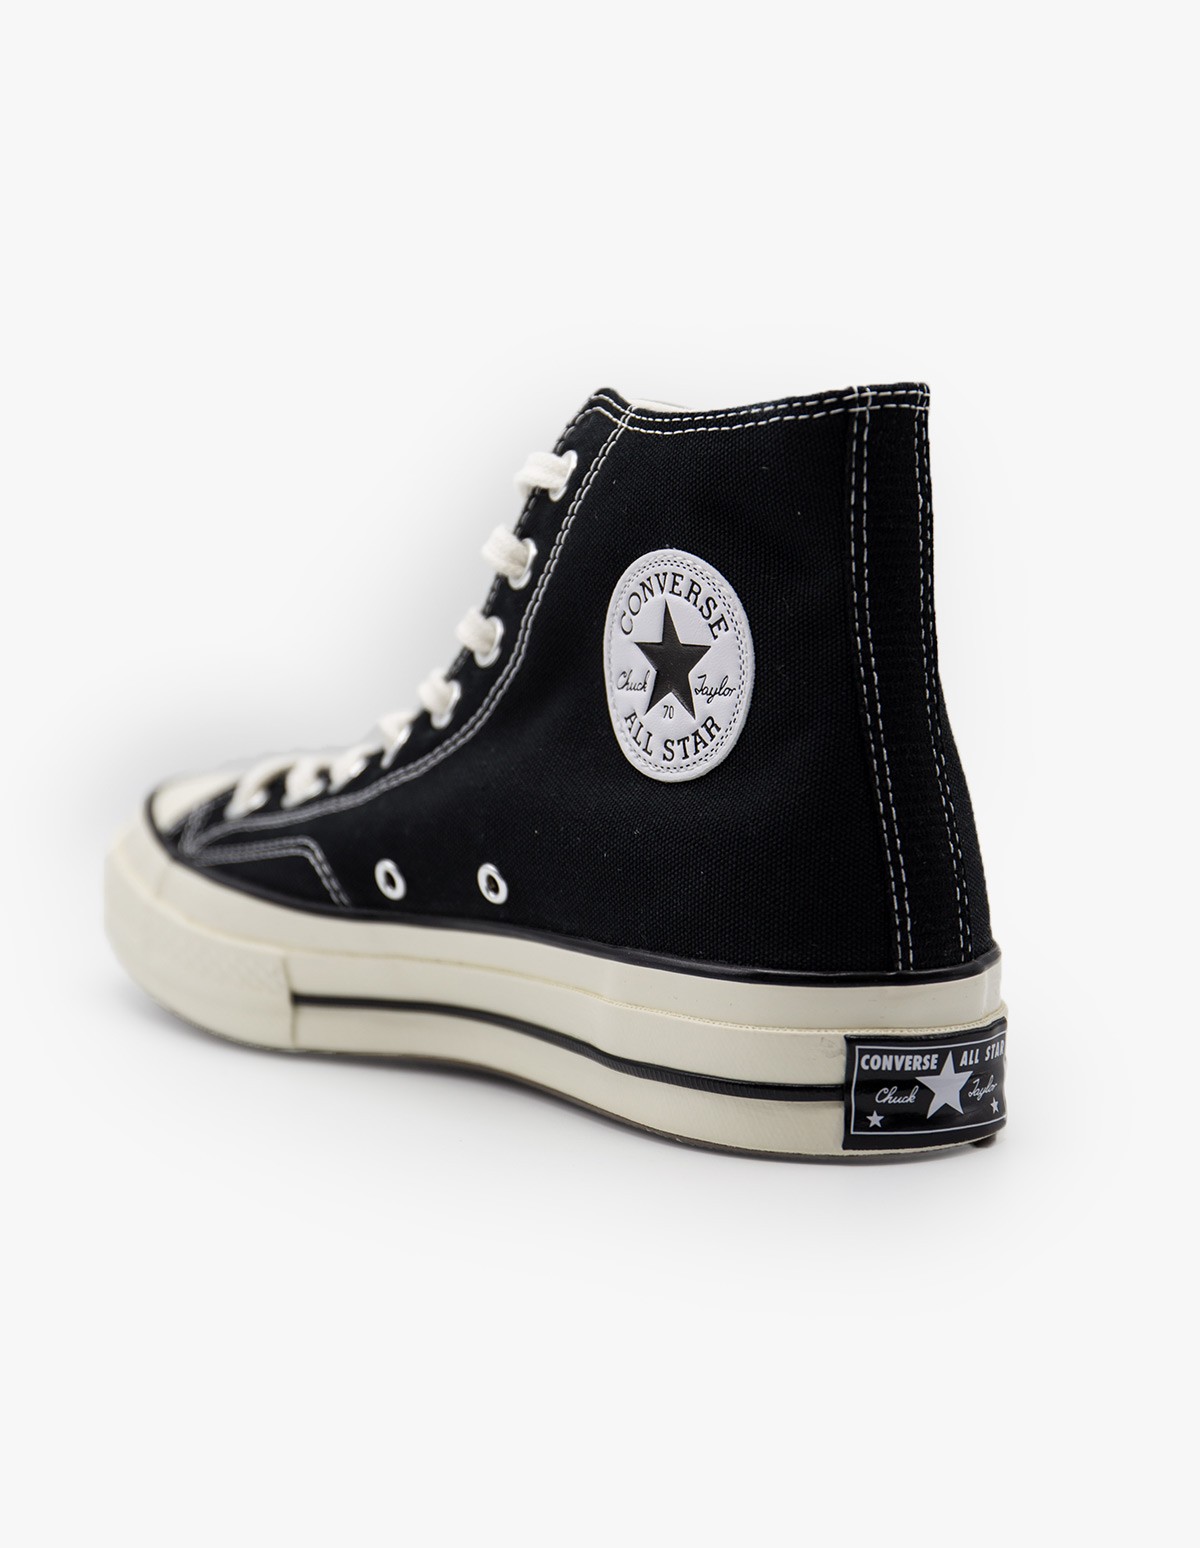 Converse Chuck Taylor High All Star '70 in Black